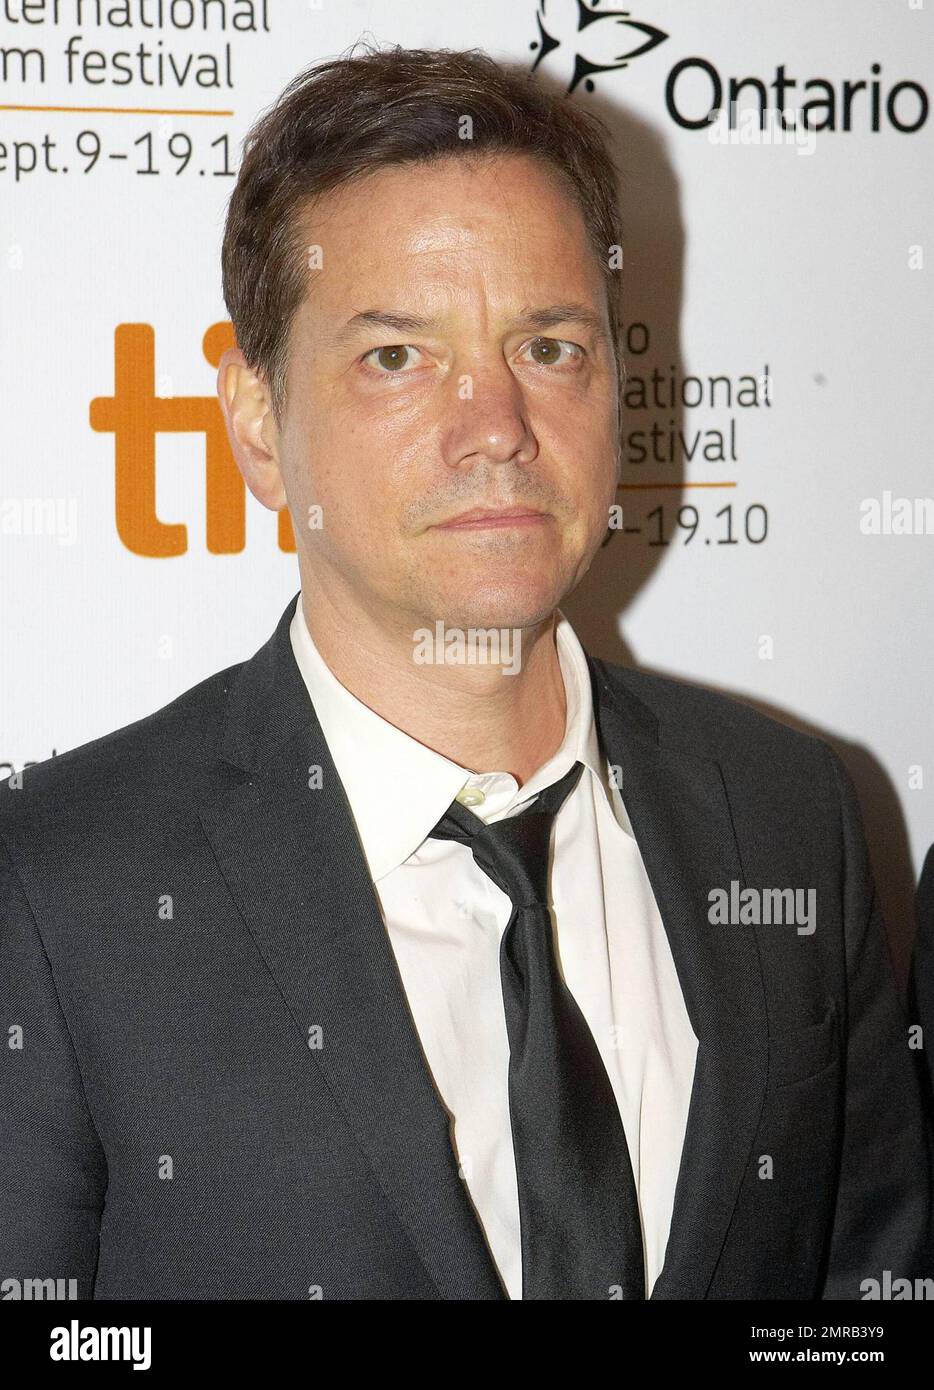 Frank Whaley arrives at the red carpet premiere of 'Janie Jones' held at Roy Thomson Hall during the 35th Toronto International Film Festival. Toronto, ON. 09/17/10. Stock Photo